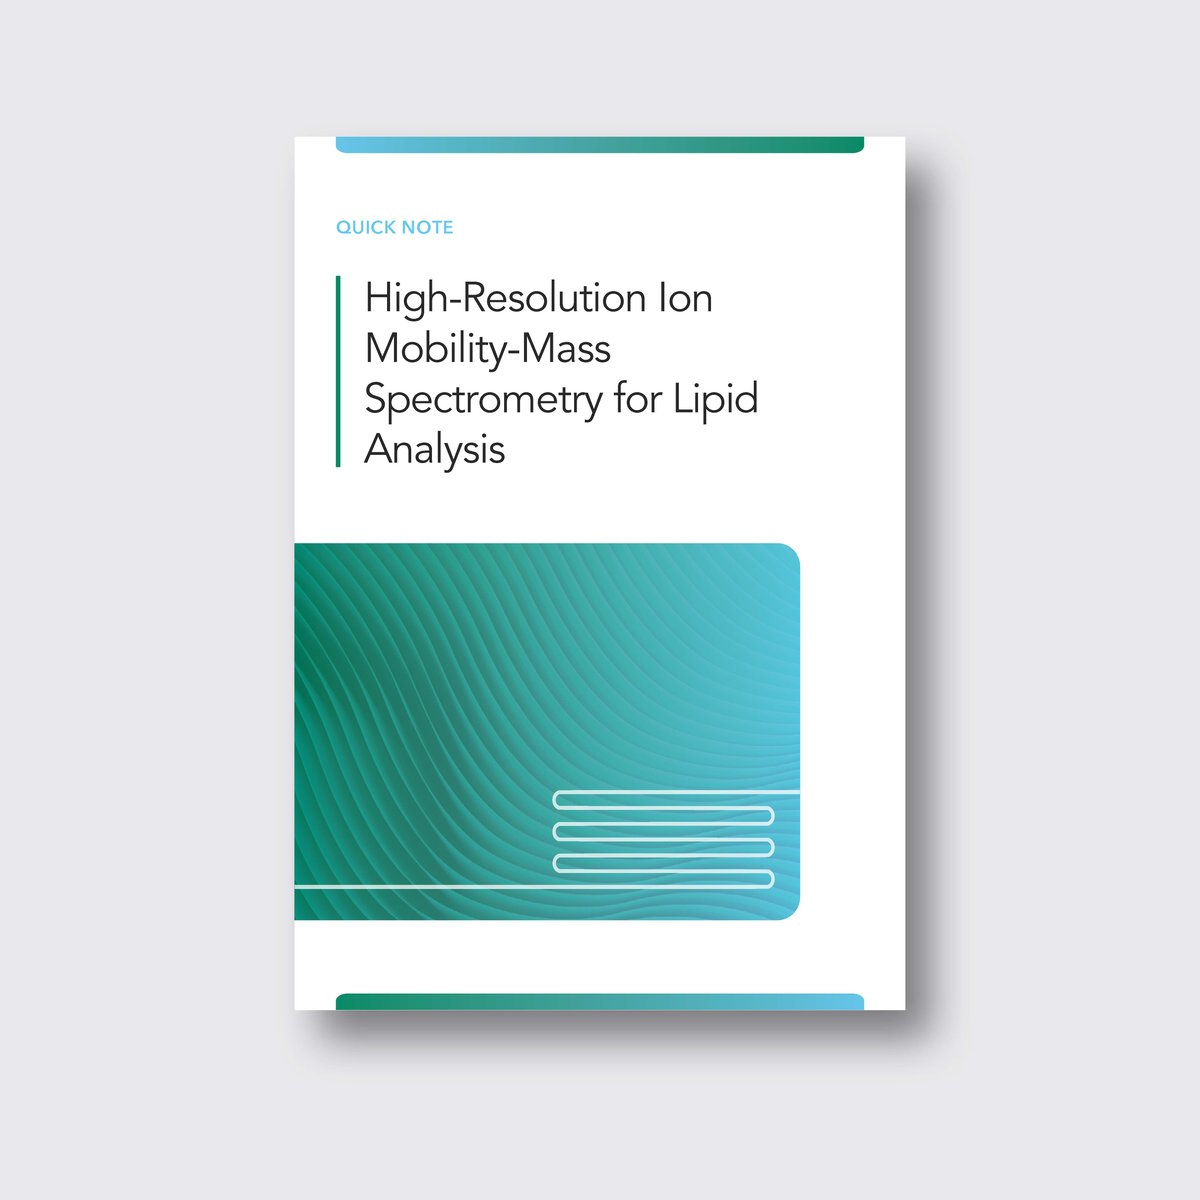 High-Resolution Ion Mobility-Mass Spectrometry for Lipid Analysis_THUMBNAIL